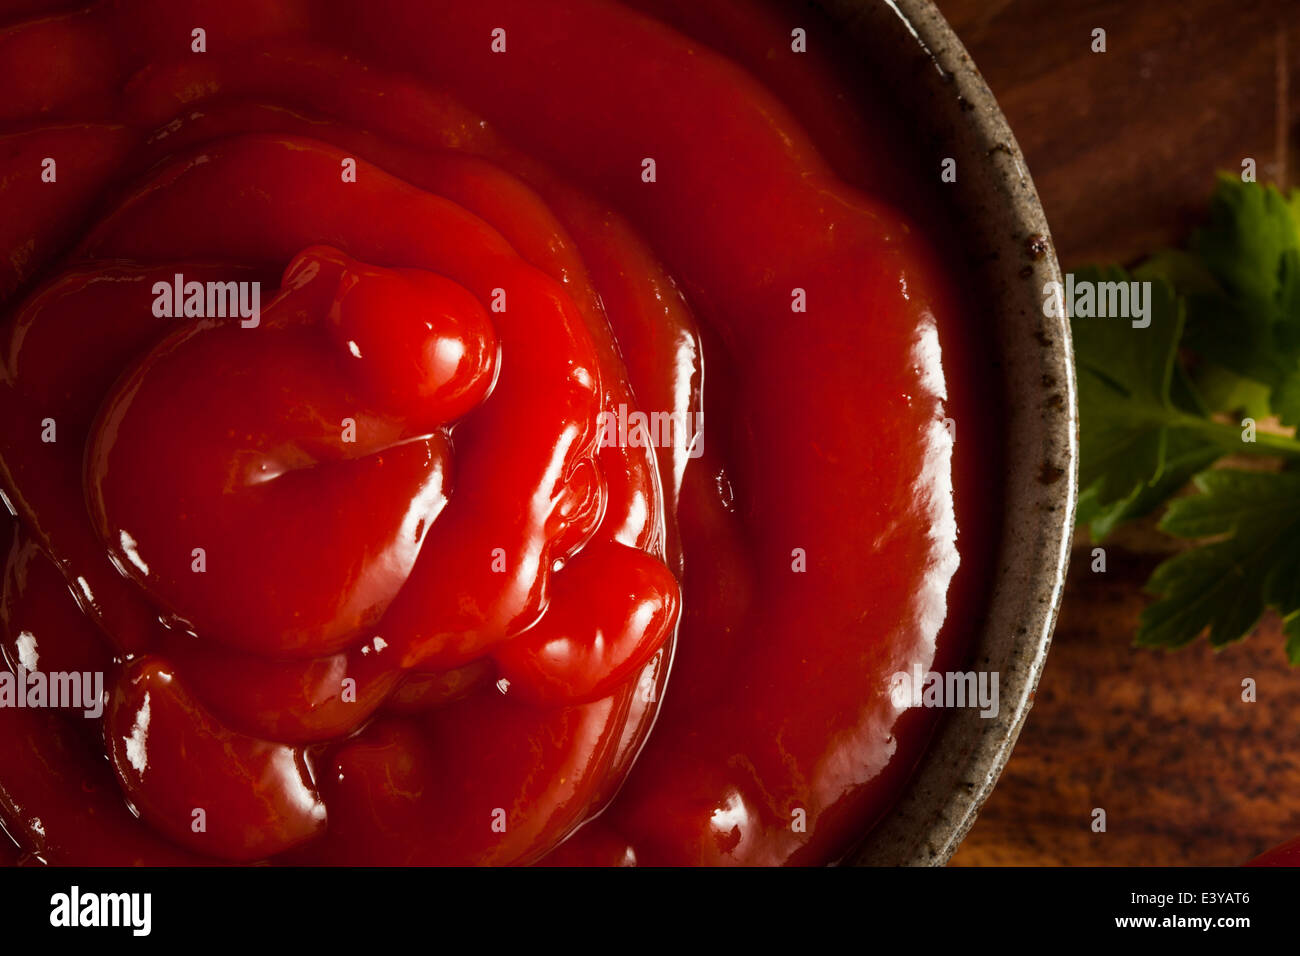 Organic Red Tomato Ketchup in a Bowl Stock Photo